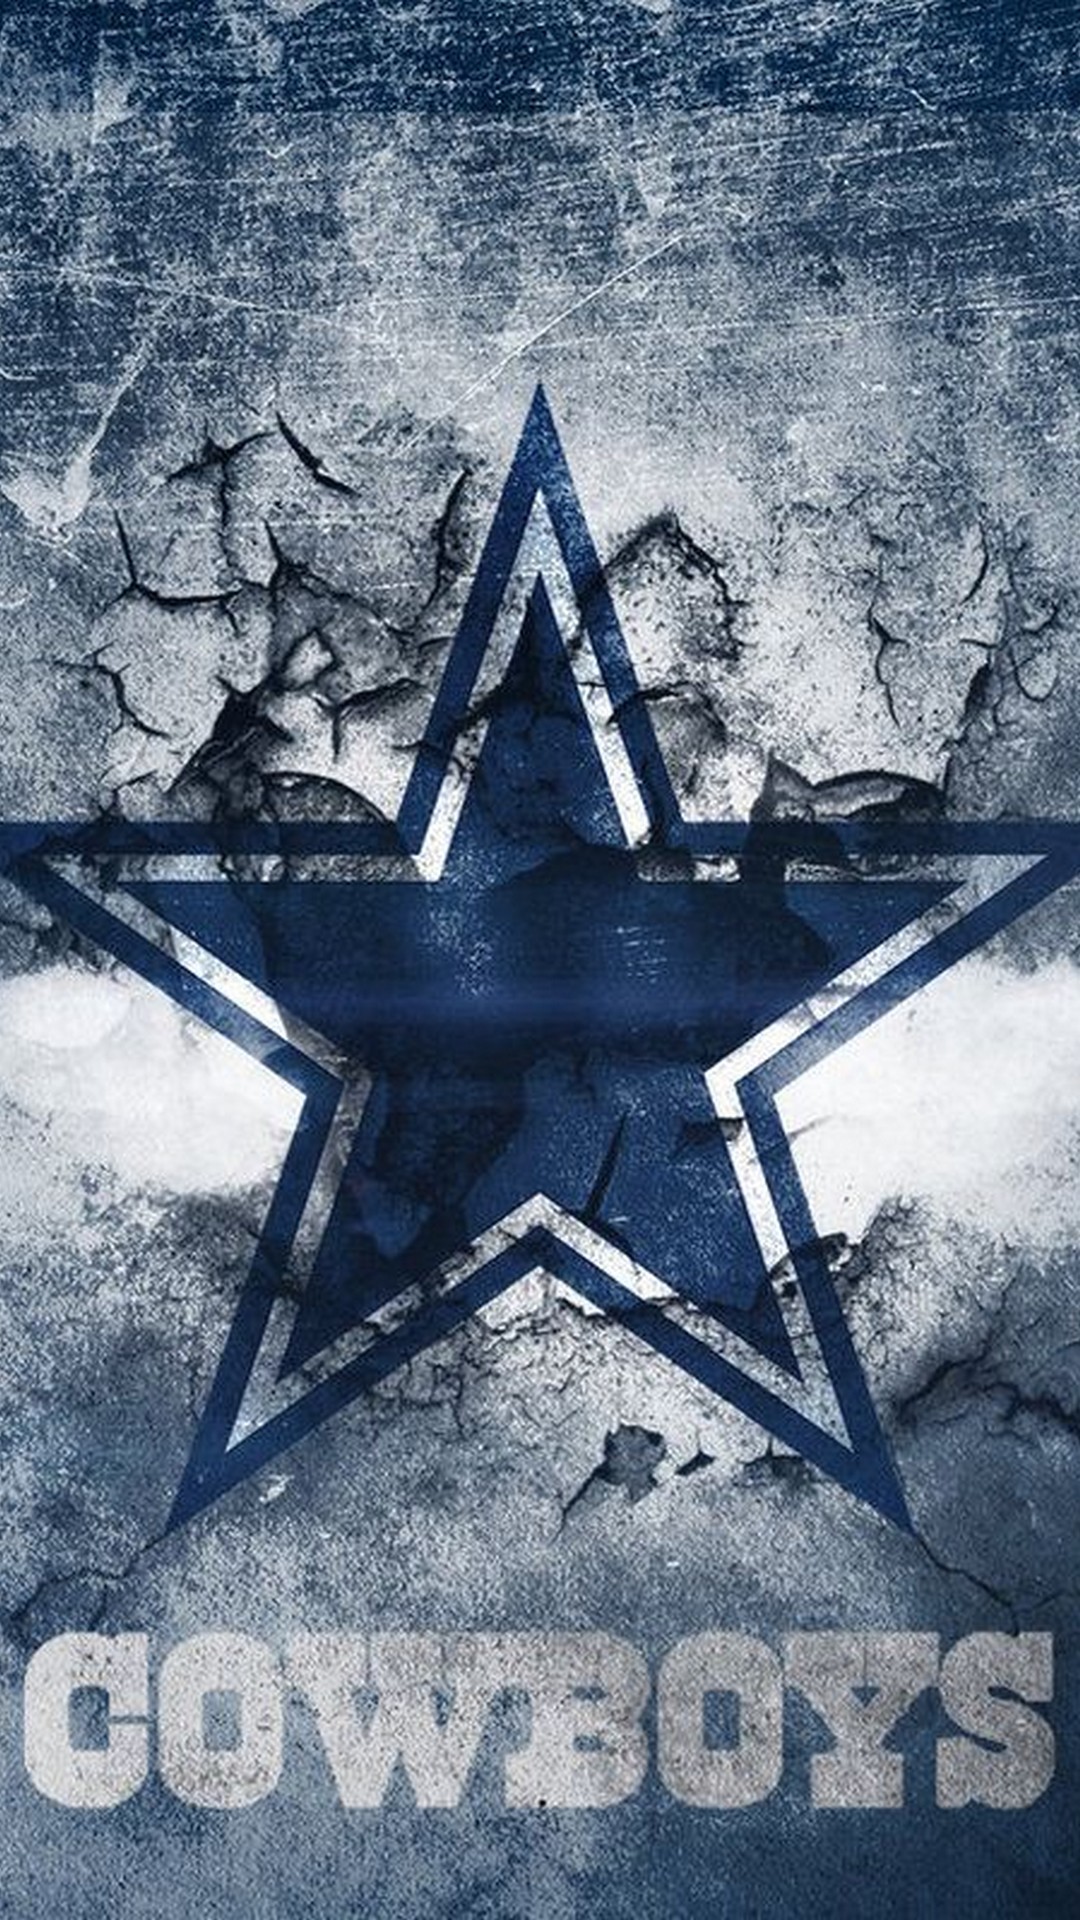 Dallas Cowboys iPhone Wallpaper Lock Screen With high-resolution 1080X1920 pixel. Download and set as wallpaper for Apple iPhone X, XS Max, XR, 8, 7, 6, SE, iPad, Android